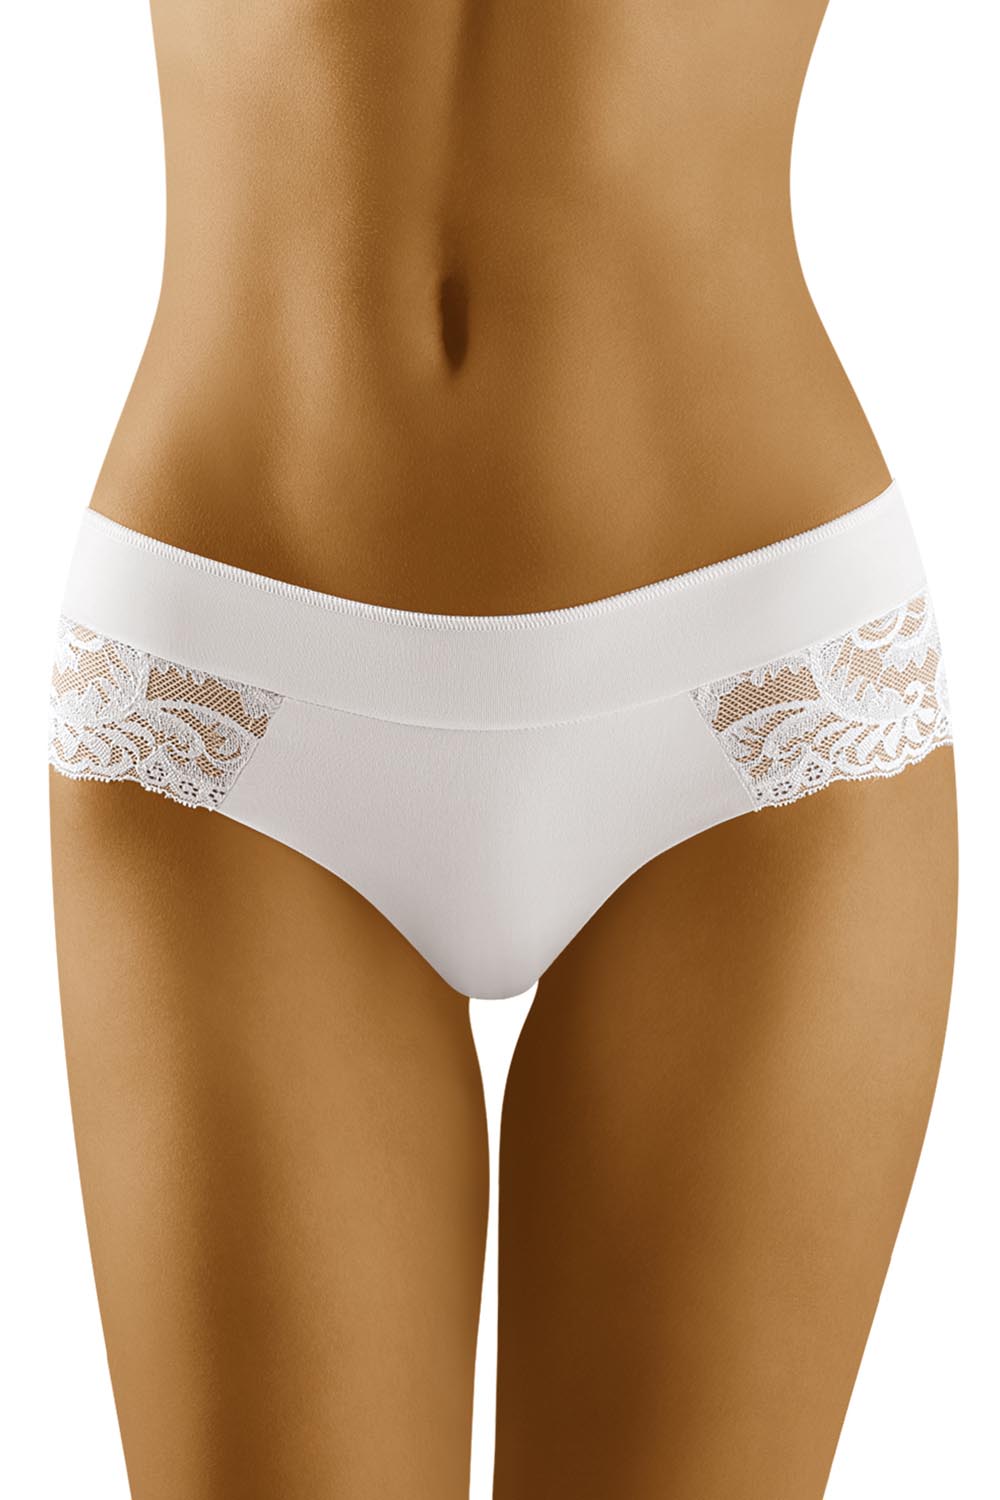 Wolbar women's briefs WB318 New Panties Comfortable Underwear,Top Quality